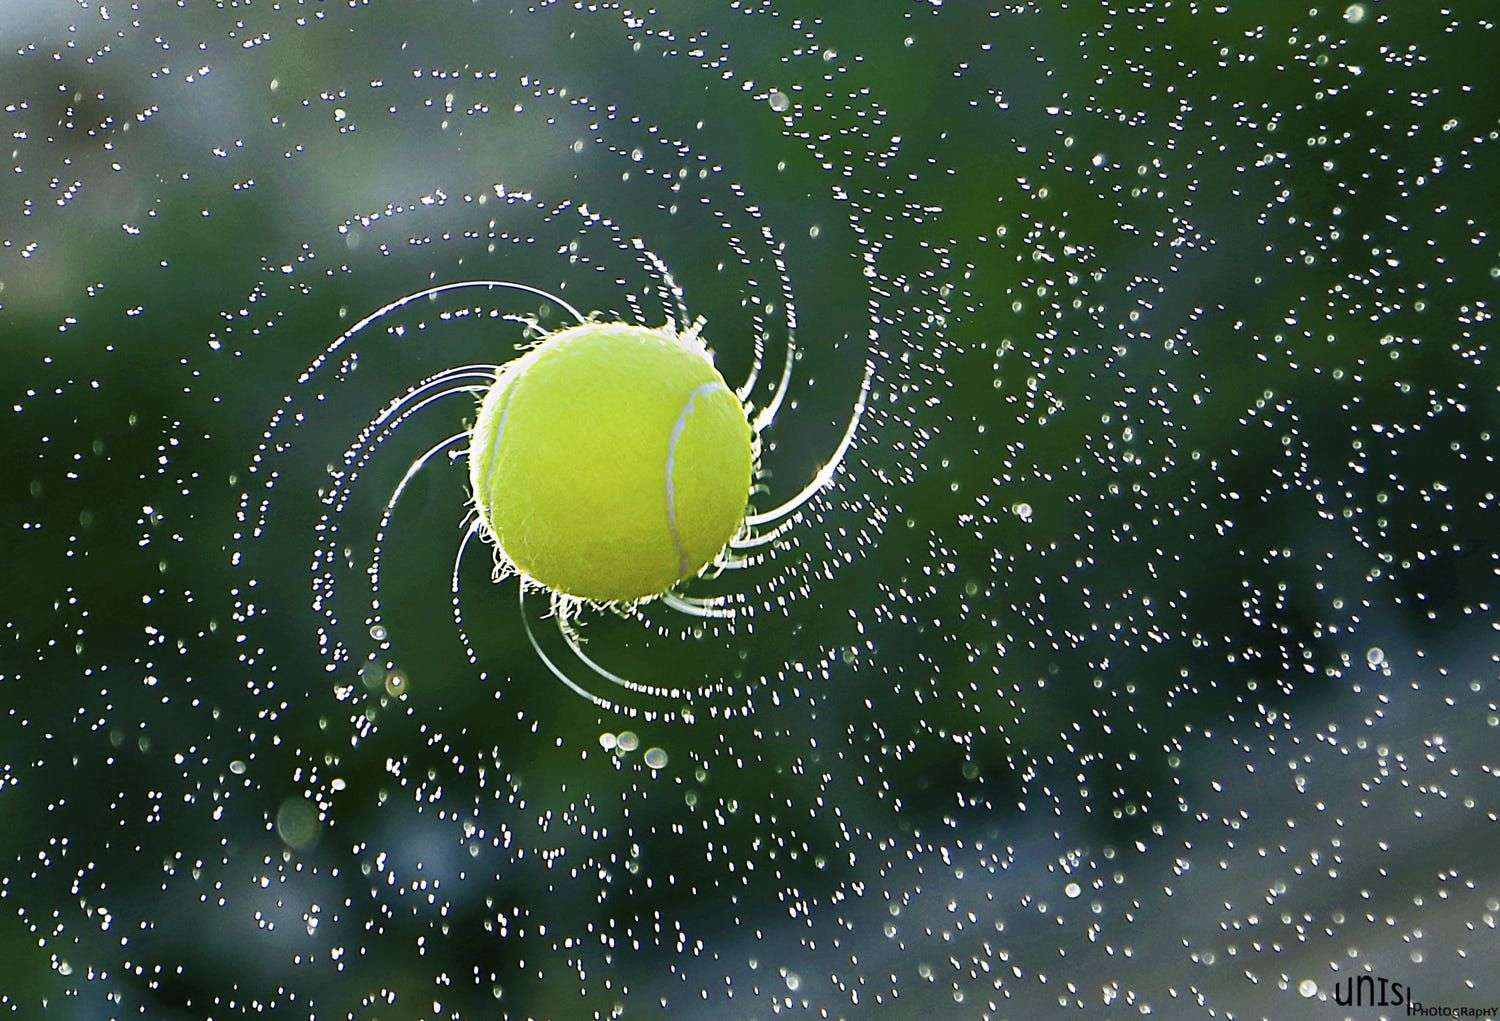 Tennis Anyone? puzzle online from photo